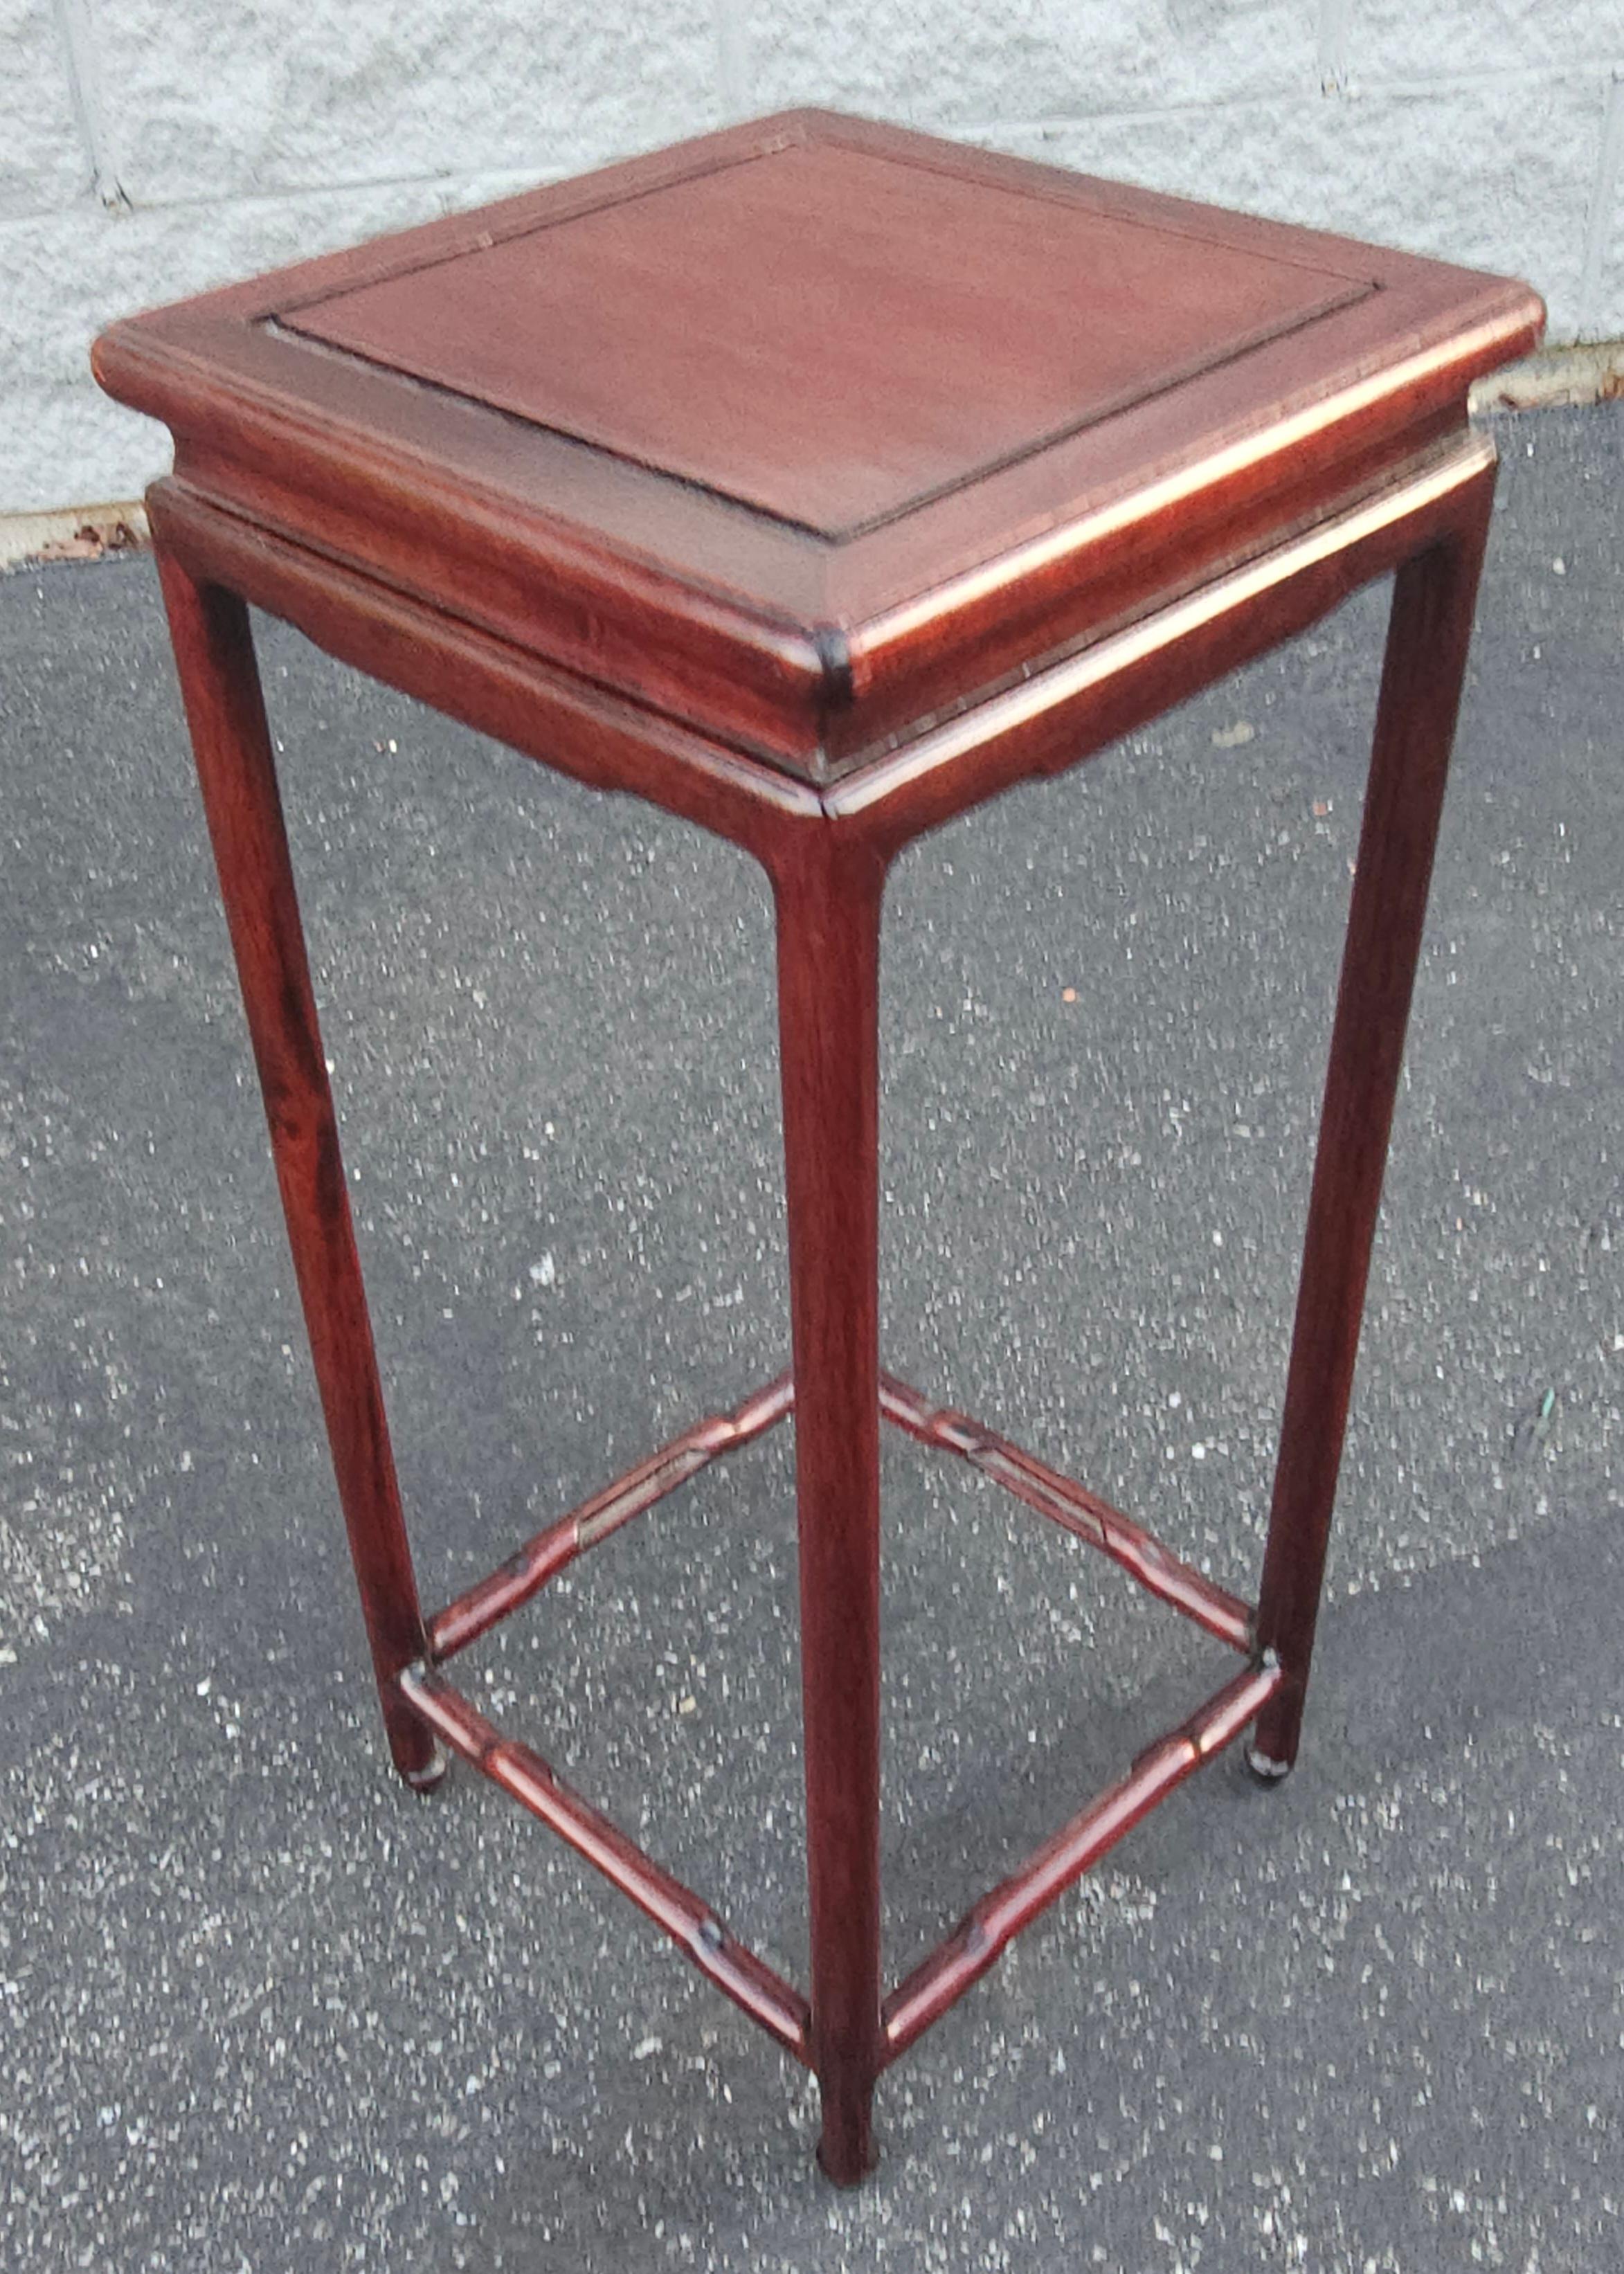 Asian Solid Rosewood Ming low height Plant Stand, Display Pedestal or Candle Stand in great vintage condition. Measures 9.5